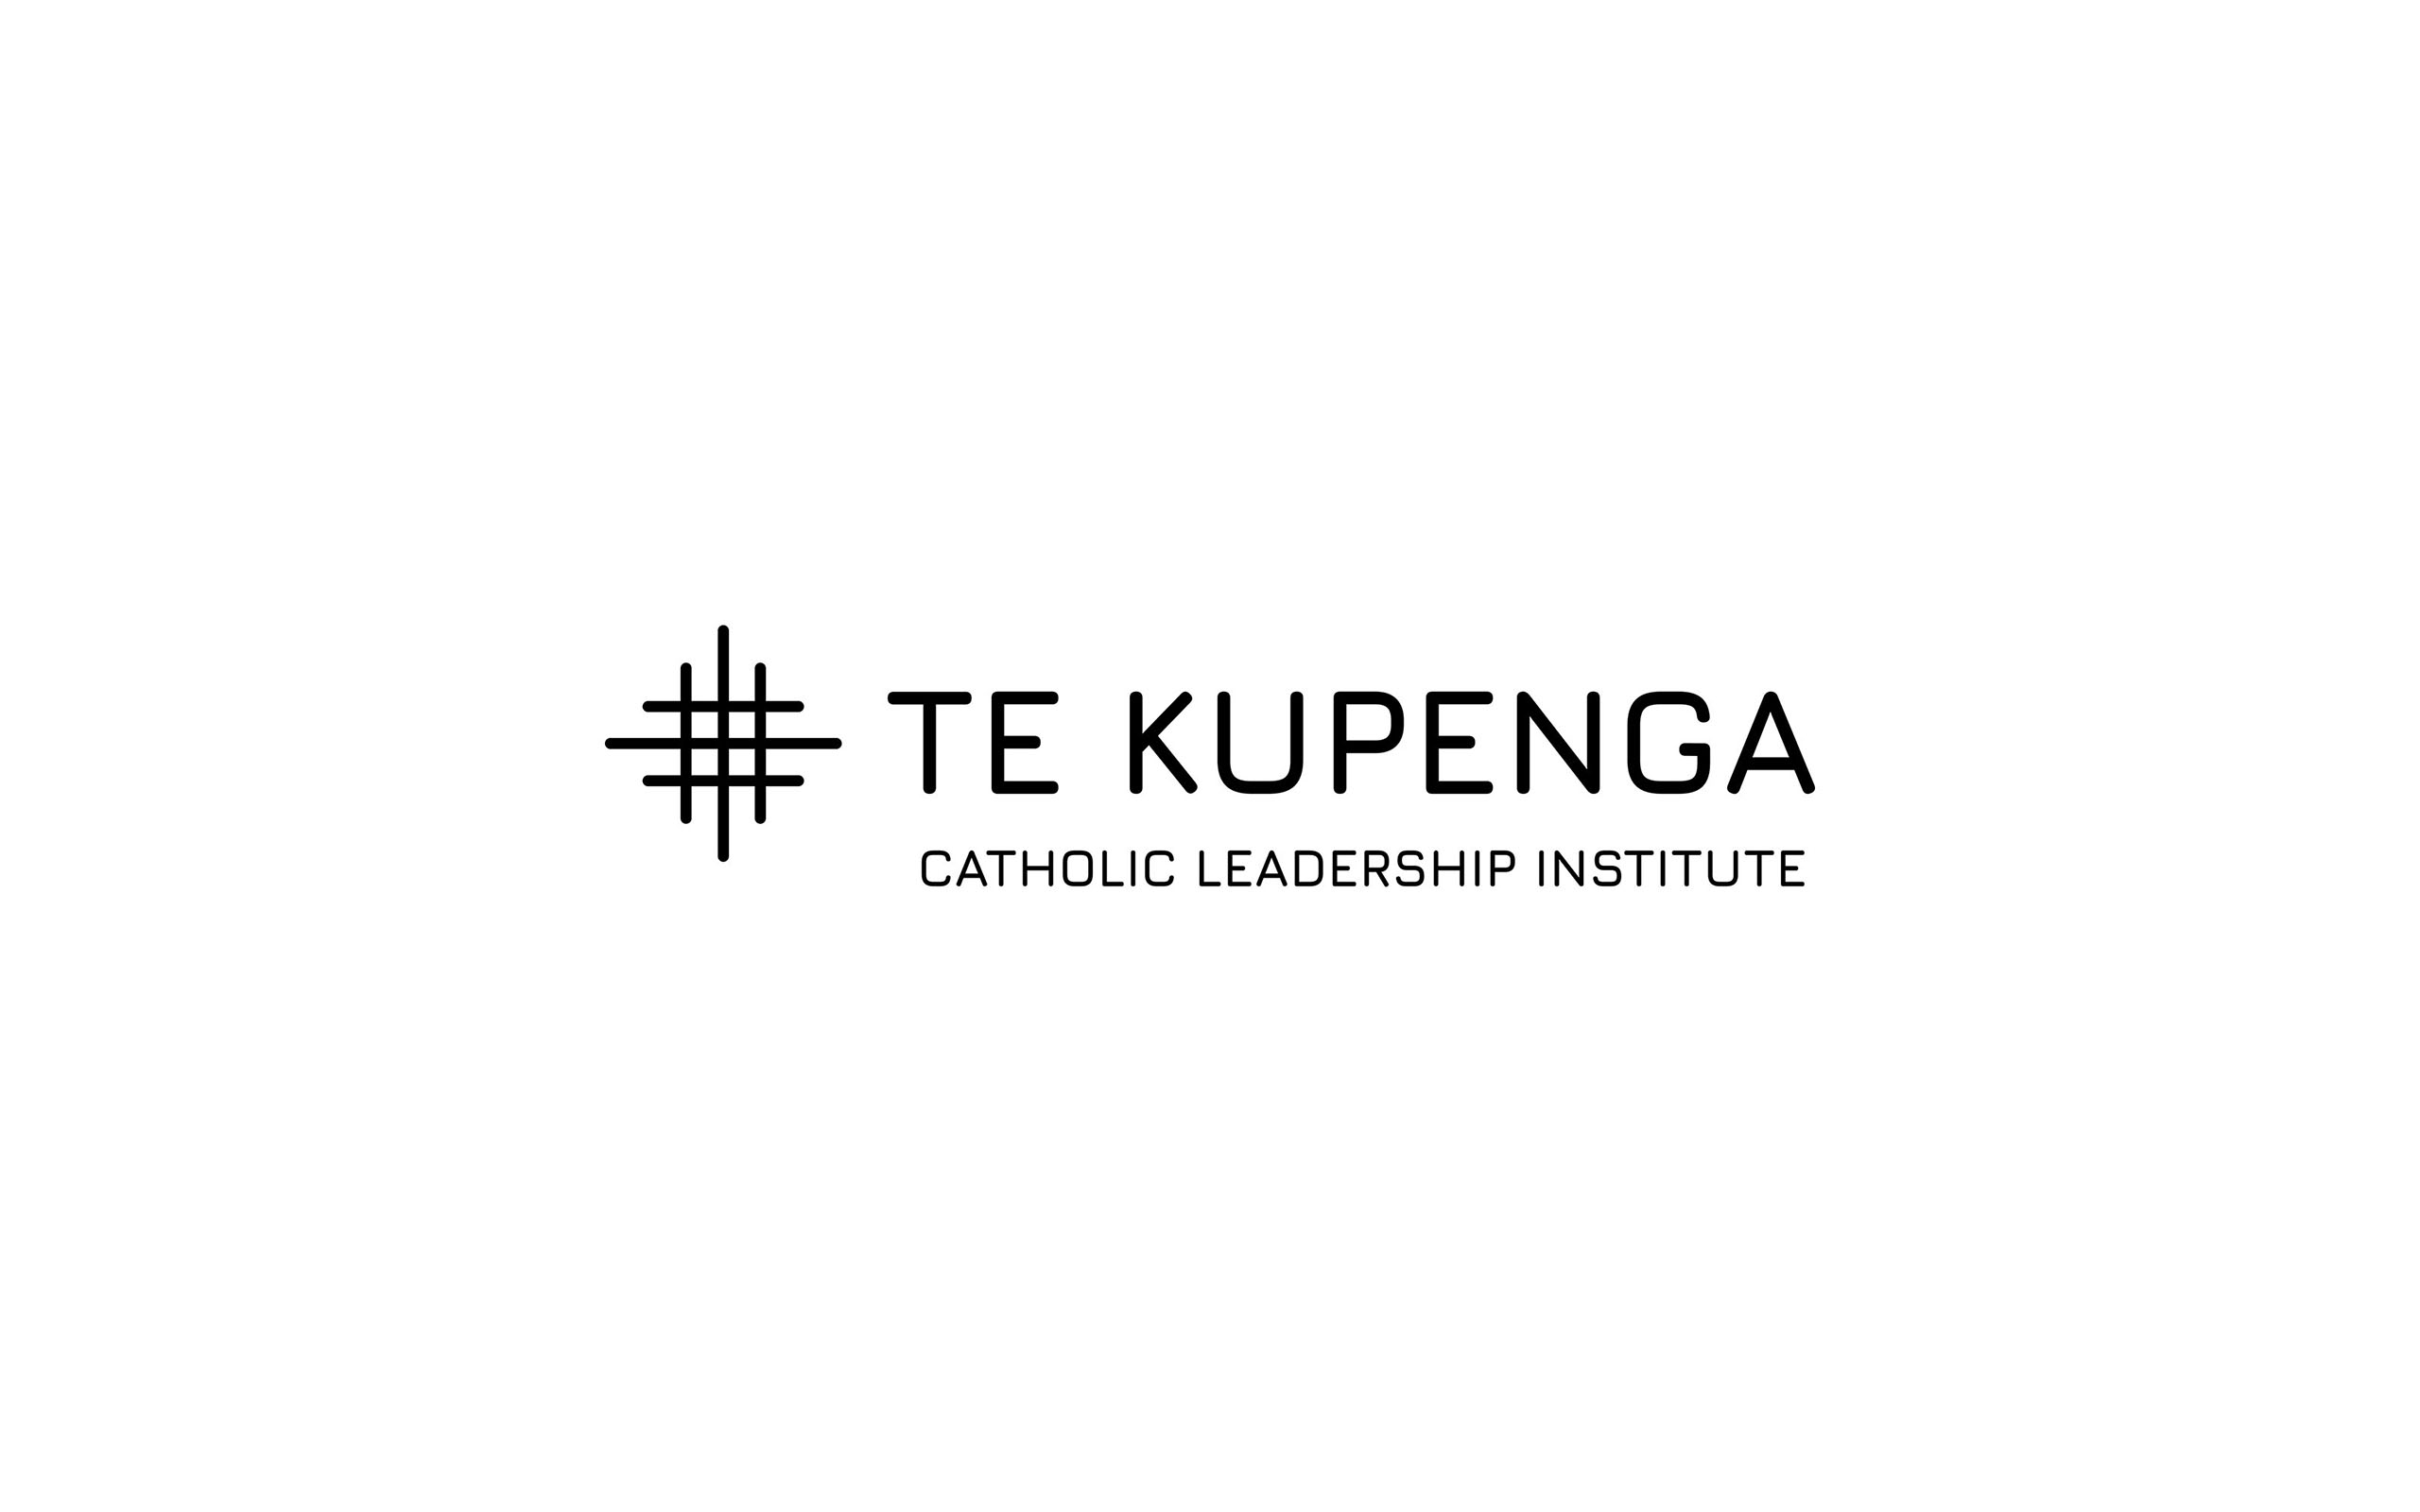 A brand that is Unified. Te Kupenga is a new 'mother' brand for an existing stable of Catholic organisations where we defined the brand architecture, identities, and designed the website.